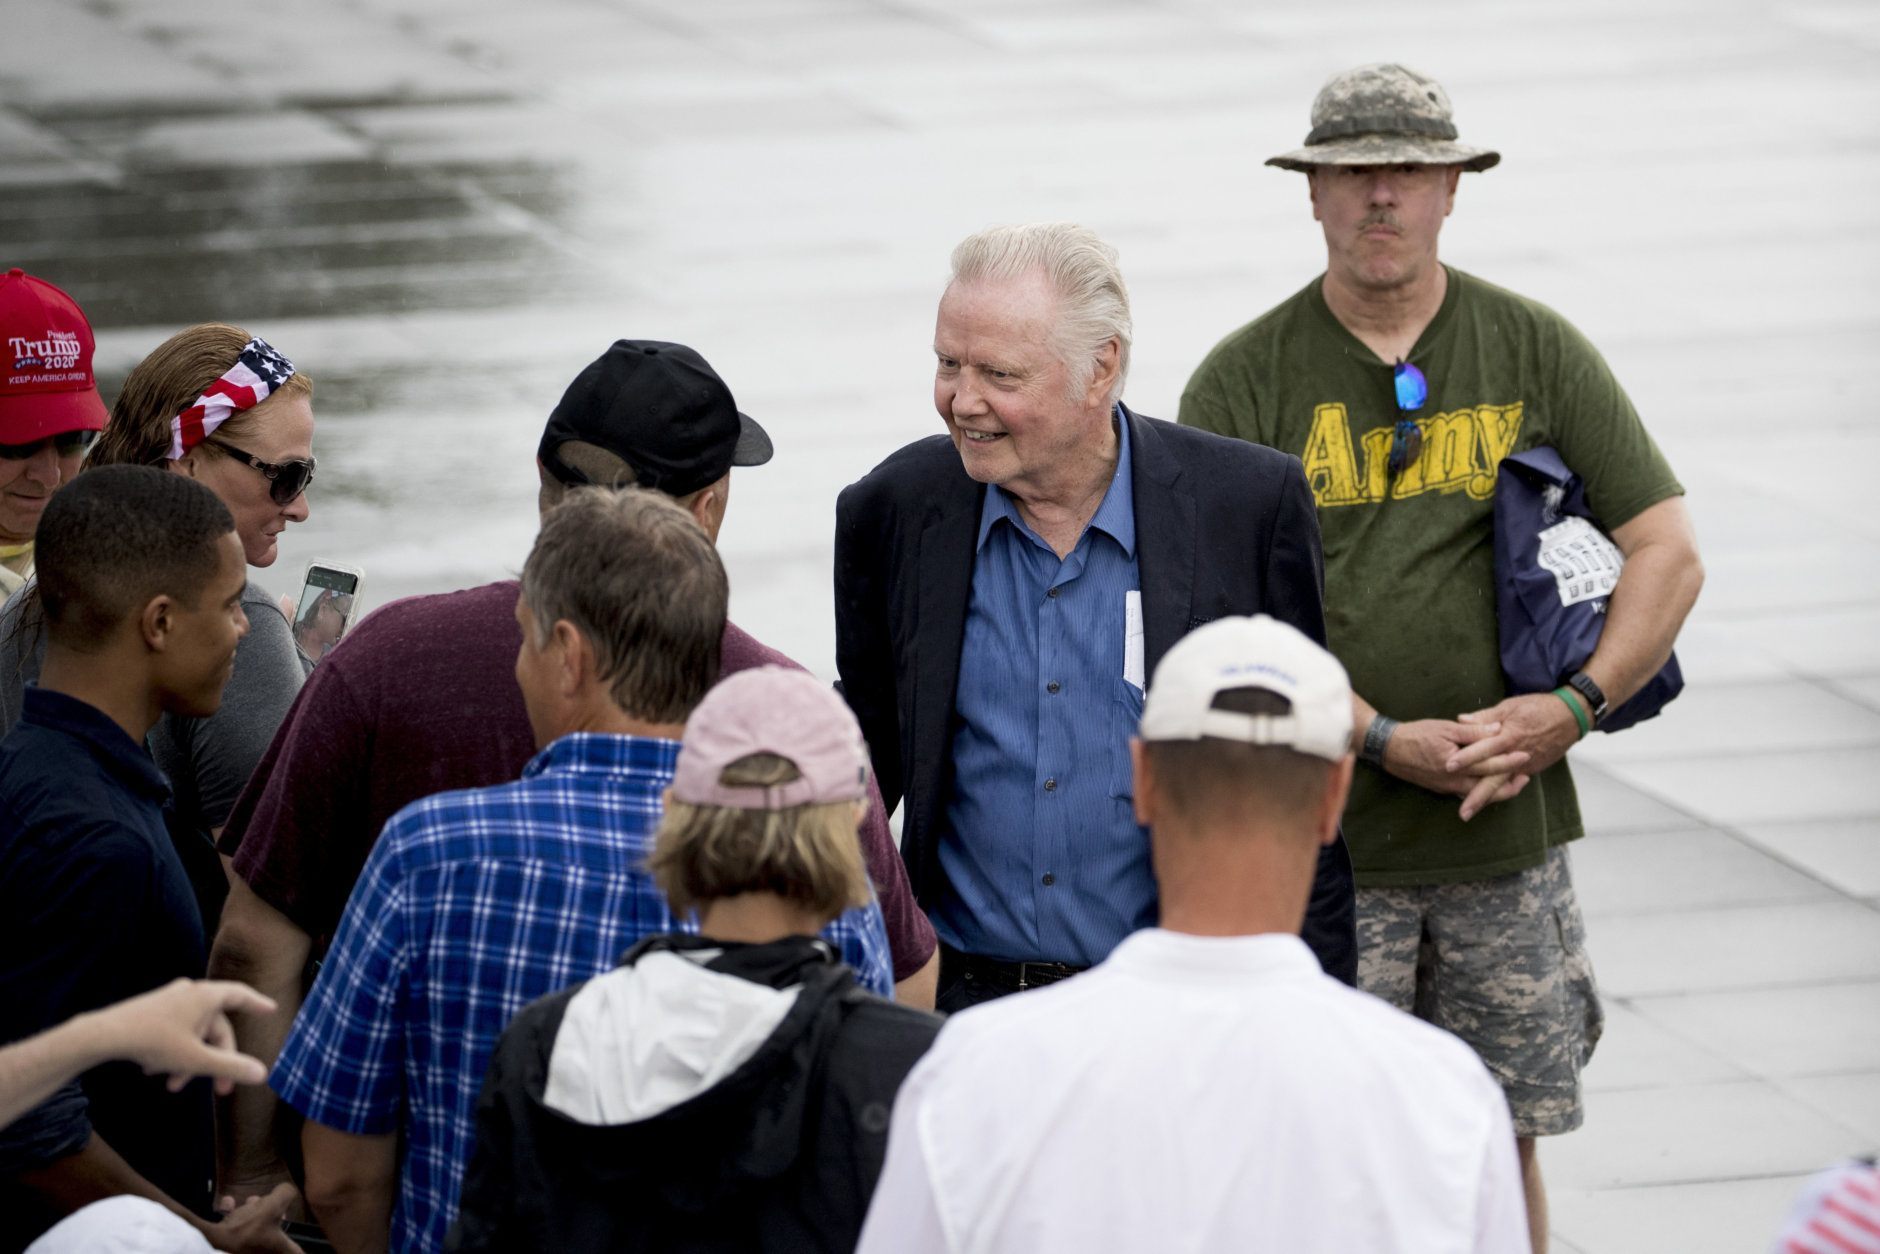 Actor Jon Voight greets visitors before President Donald Trump's Independence Day celebration in front of the Lincoln Memorial, Thursday, July 4, 2019, in Washington. (AP Photo/Andrew Harnik)